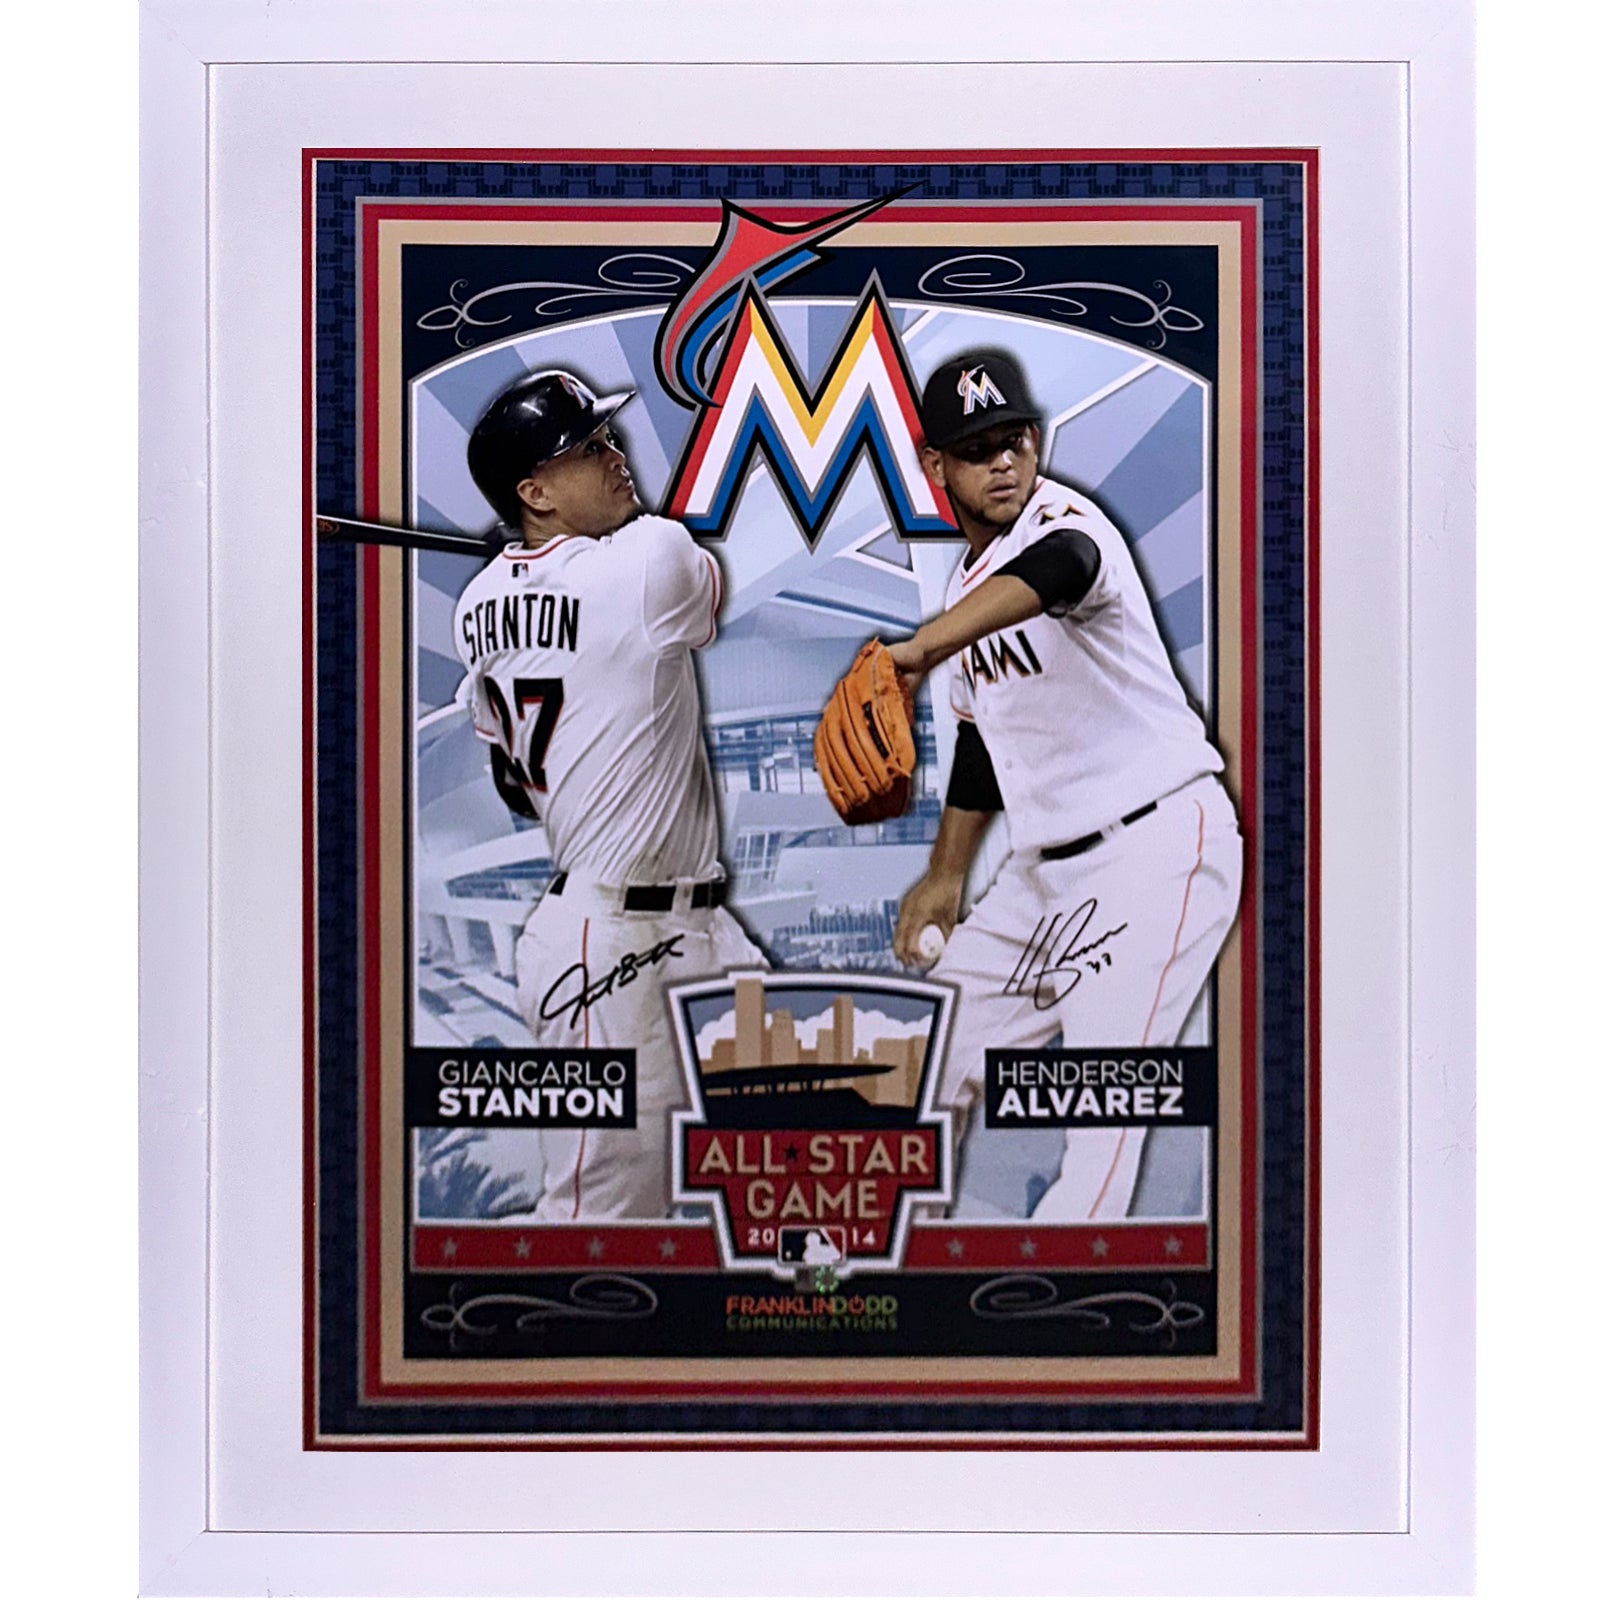 Giancarlo Stanton And Henderson Alvarez Autographed Miami Marlins 2014 All Star Game Deluxe Framed 18